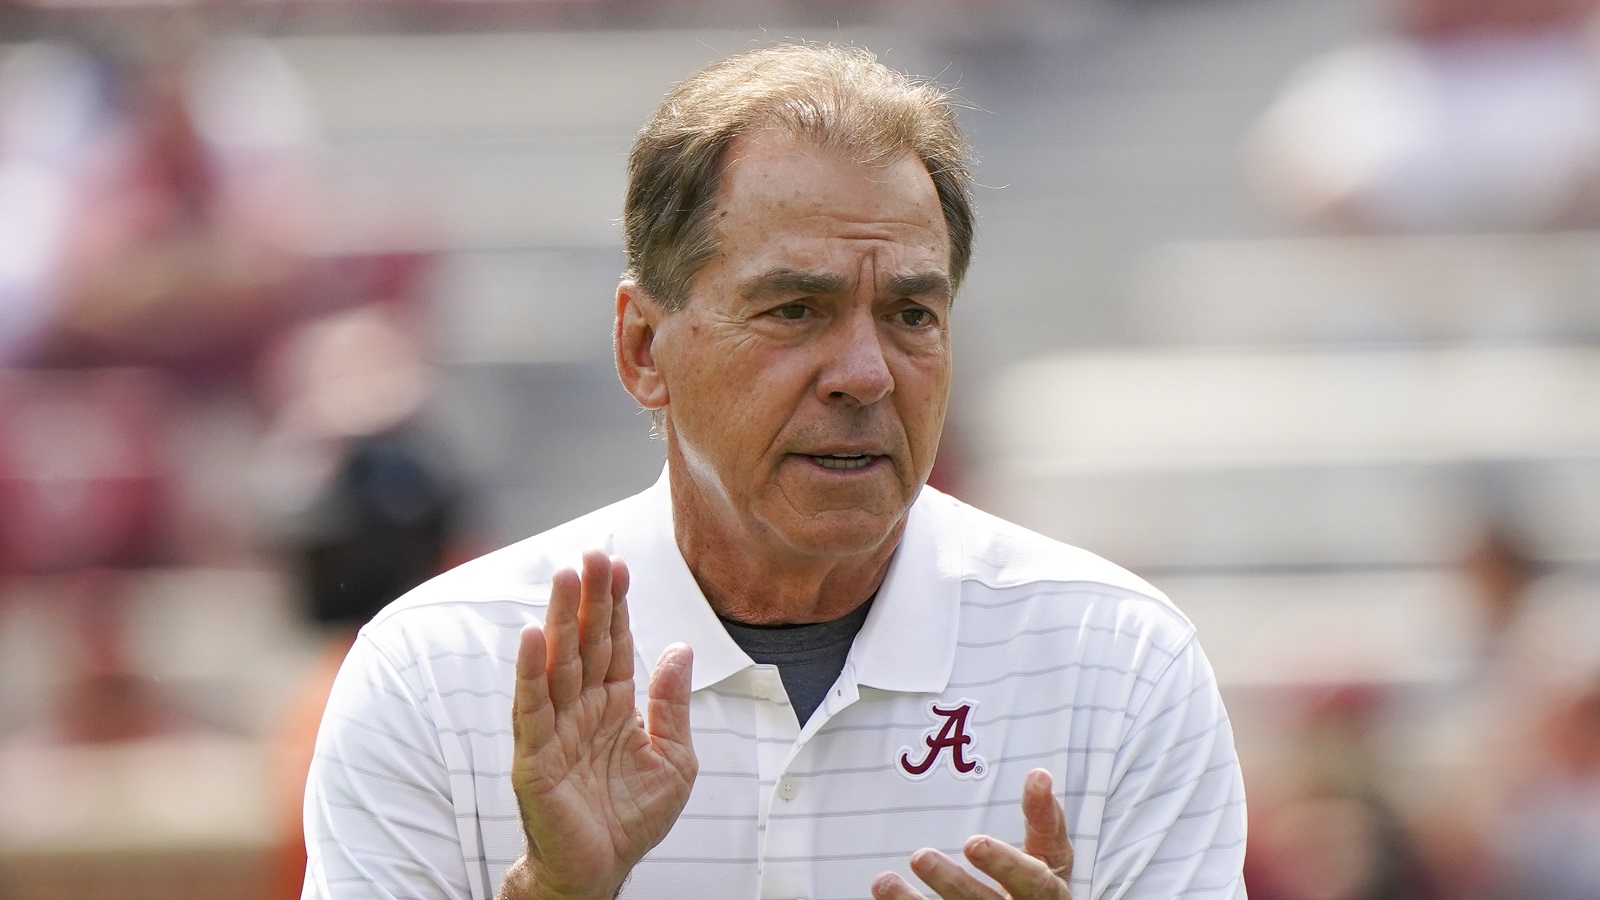 Nick Saban Had Funny Quote About Cut On His Face